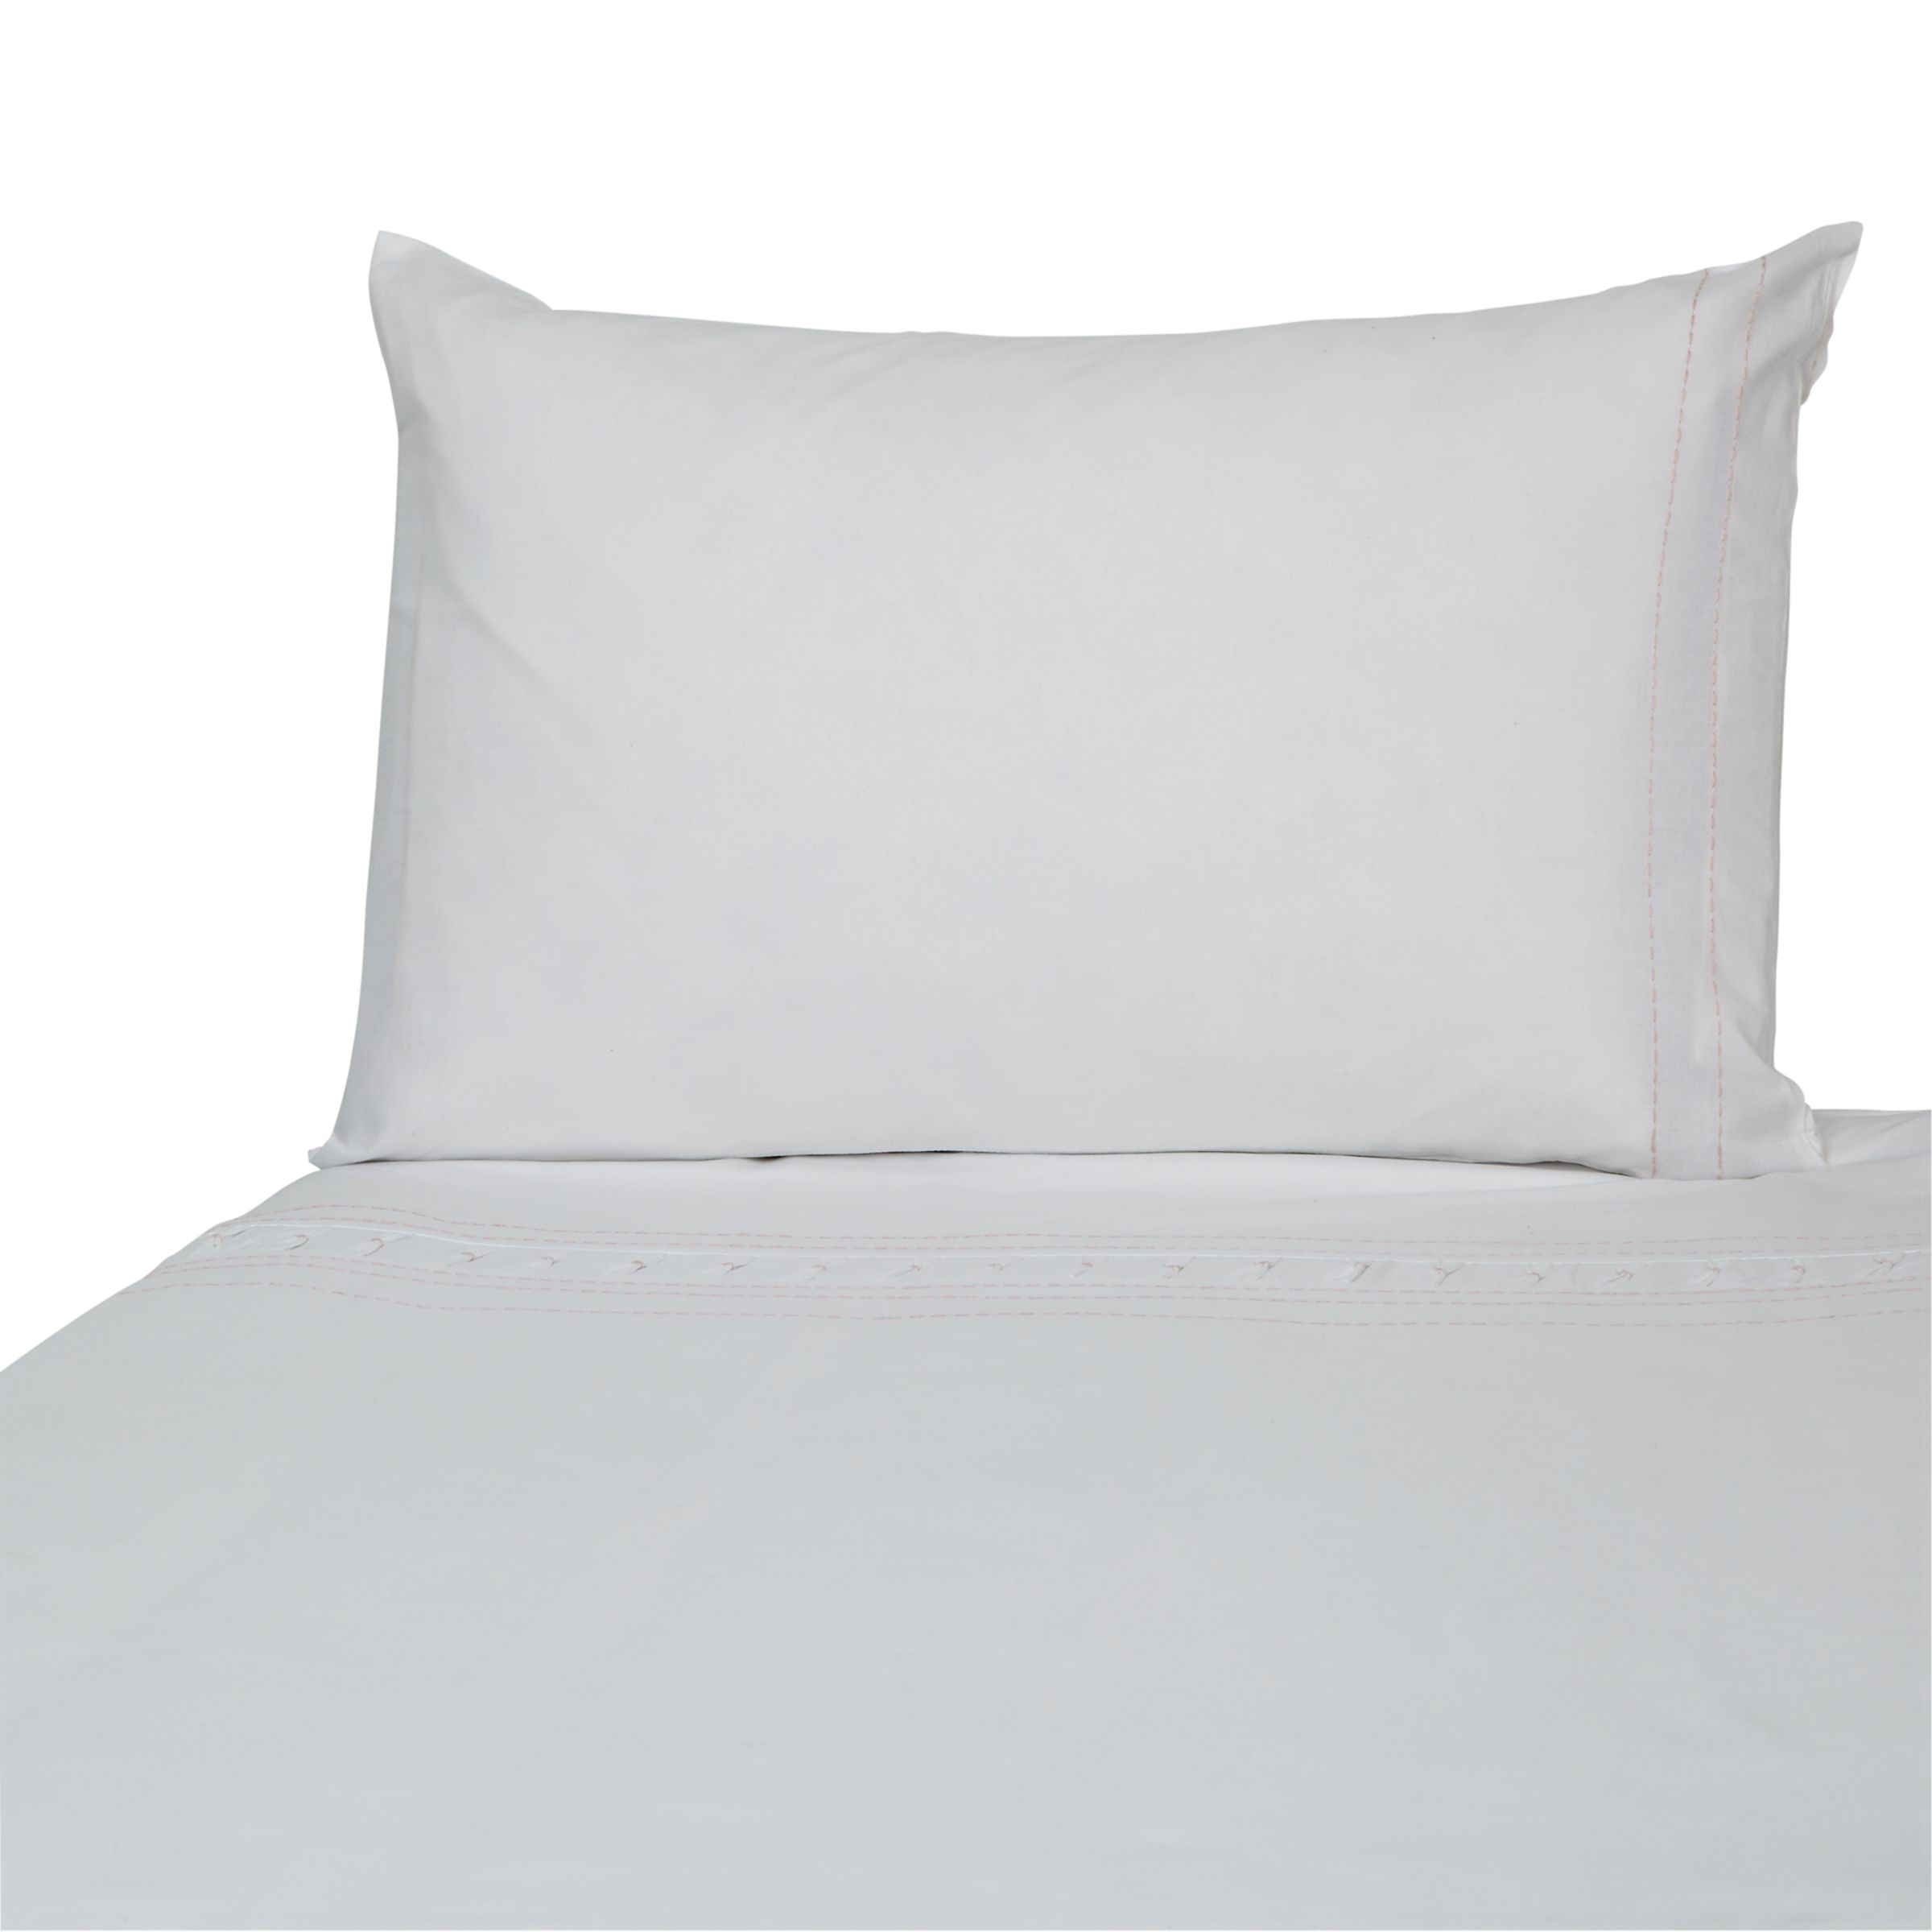 John Lewis Partners Baby Cotbed Duvet Cover And Pillowcase Set